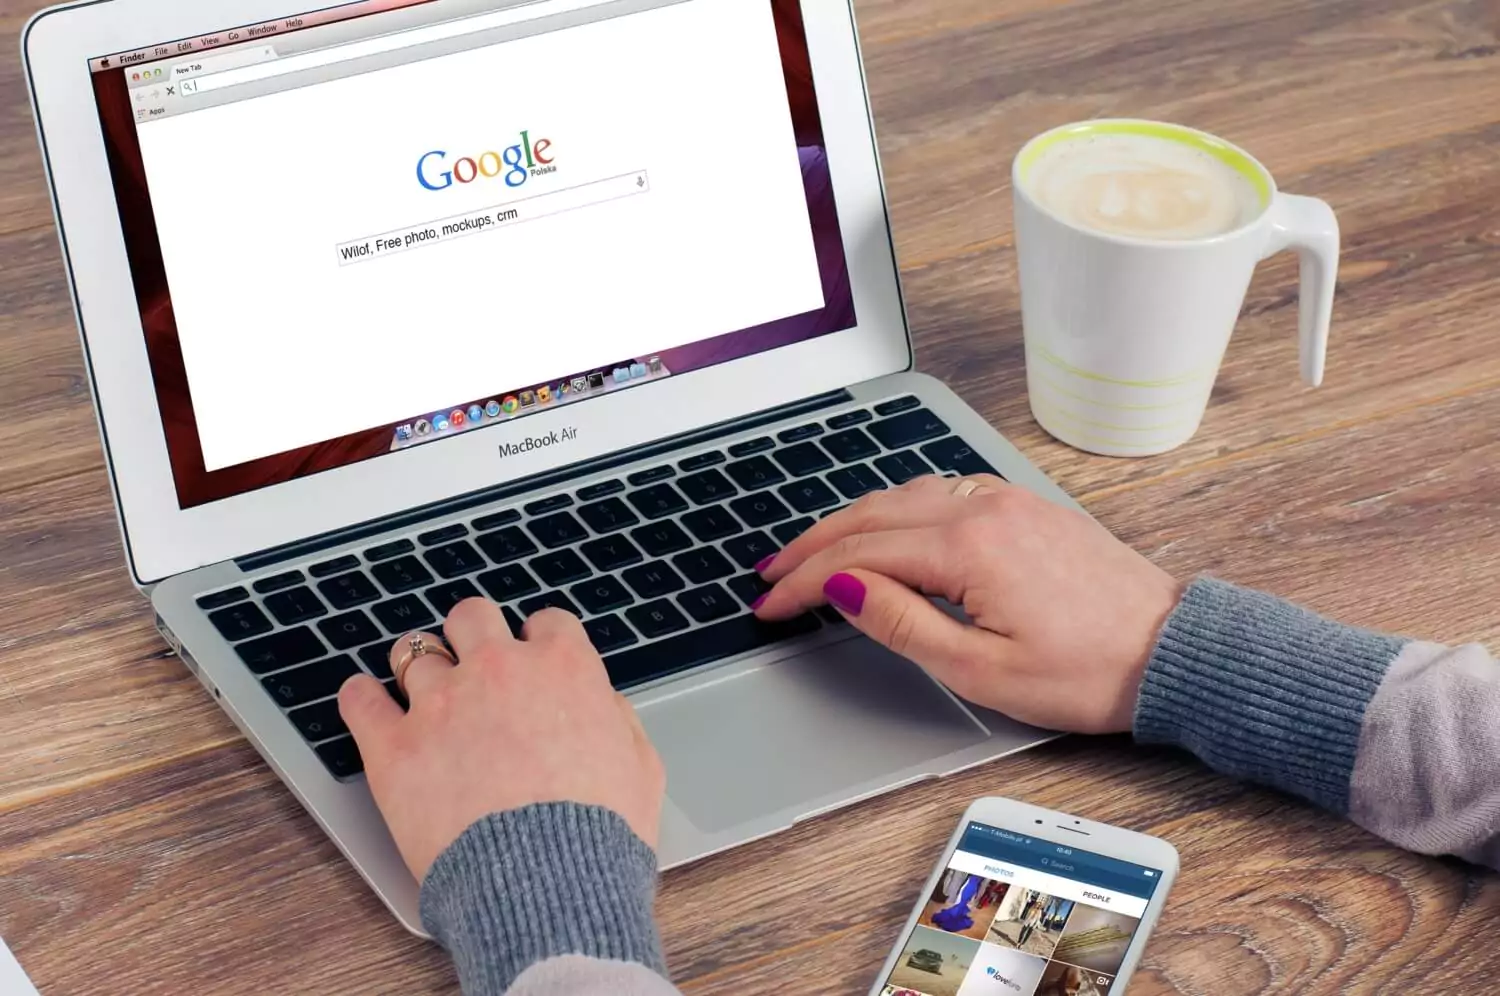 A Good Content Should Serve Both the Audience and Search Engines Like Google